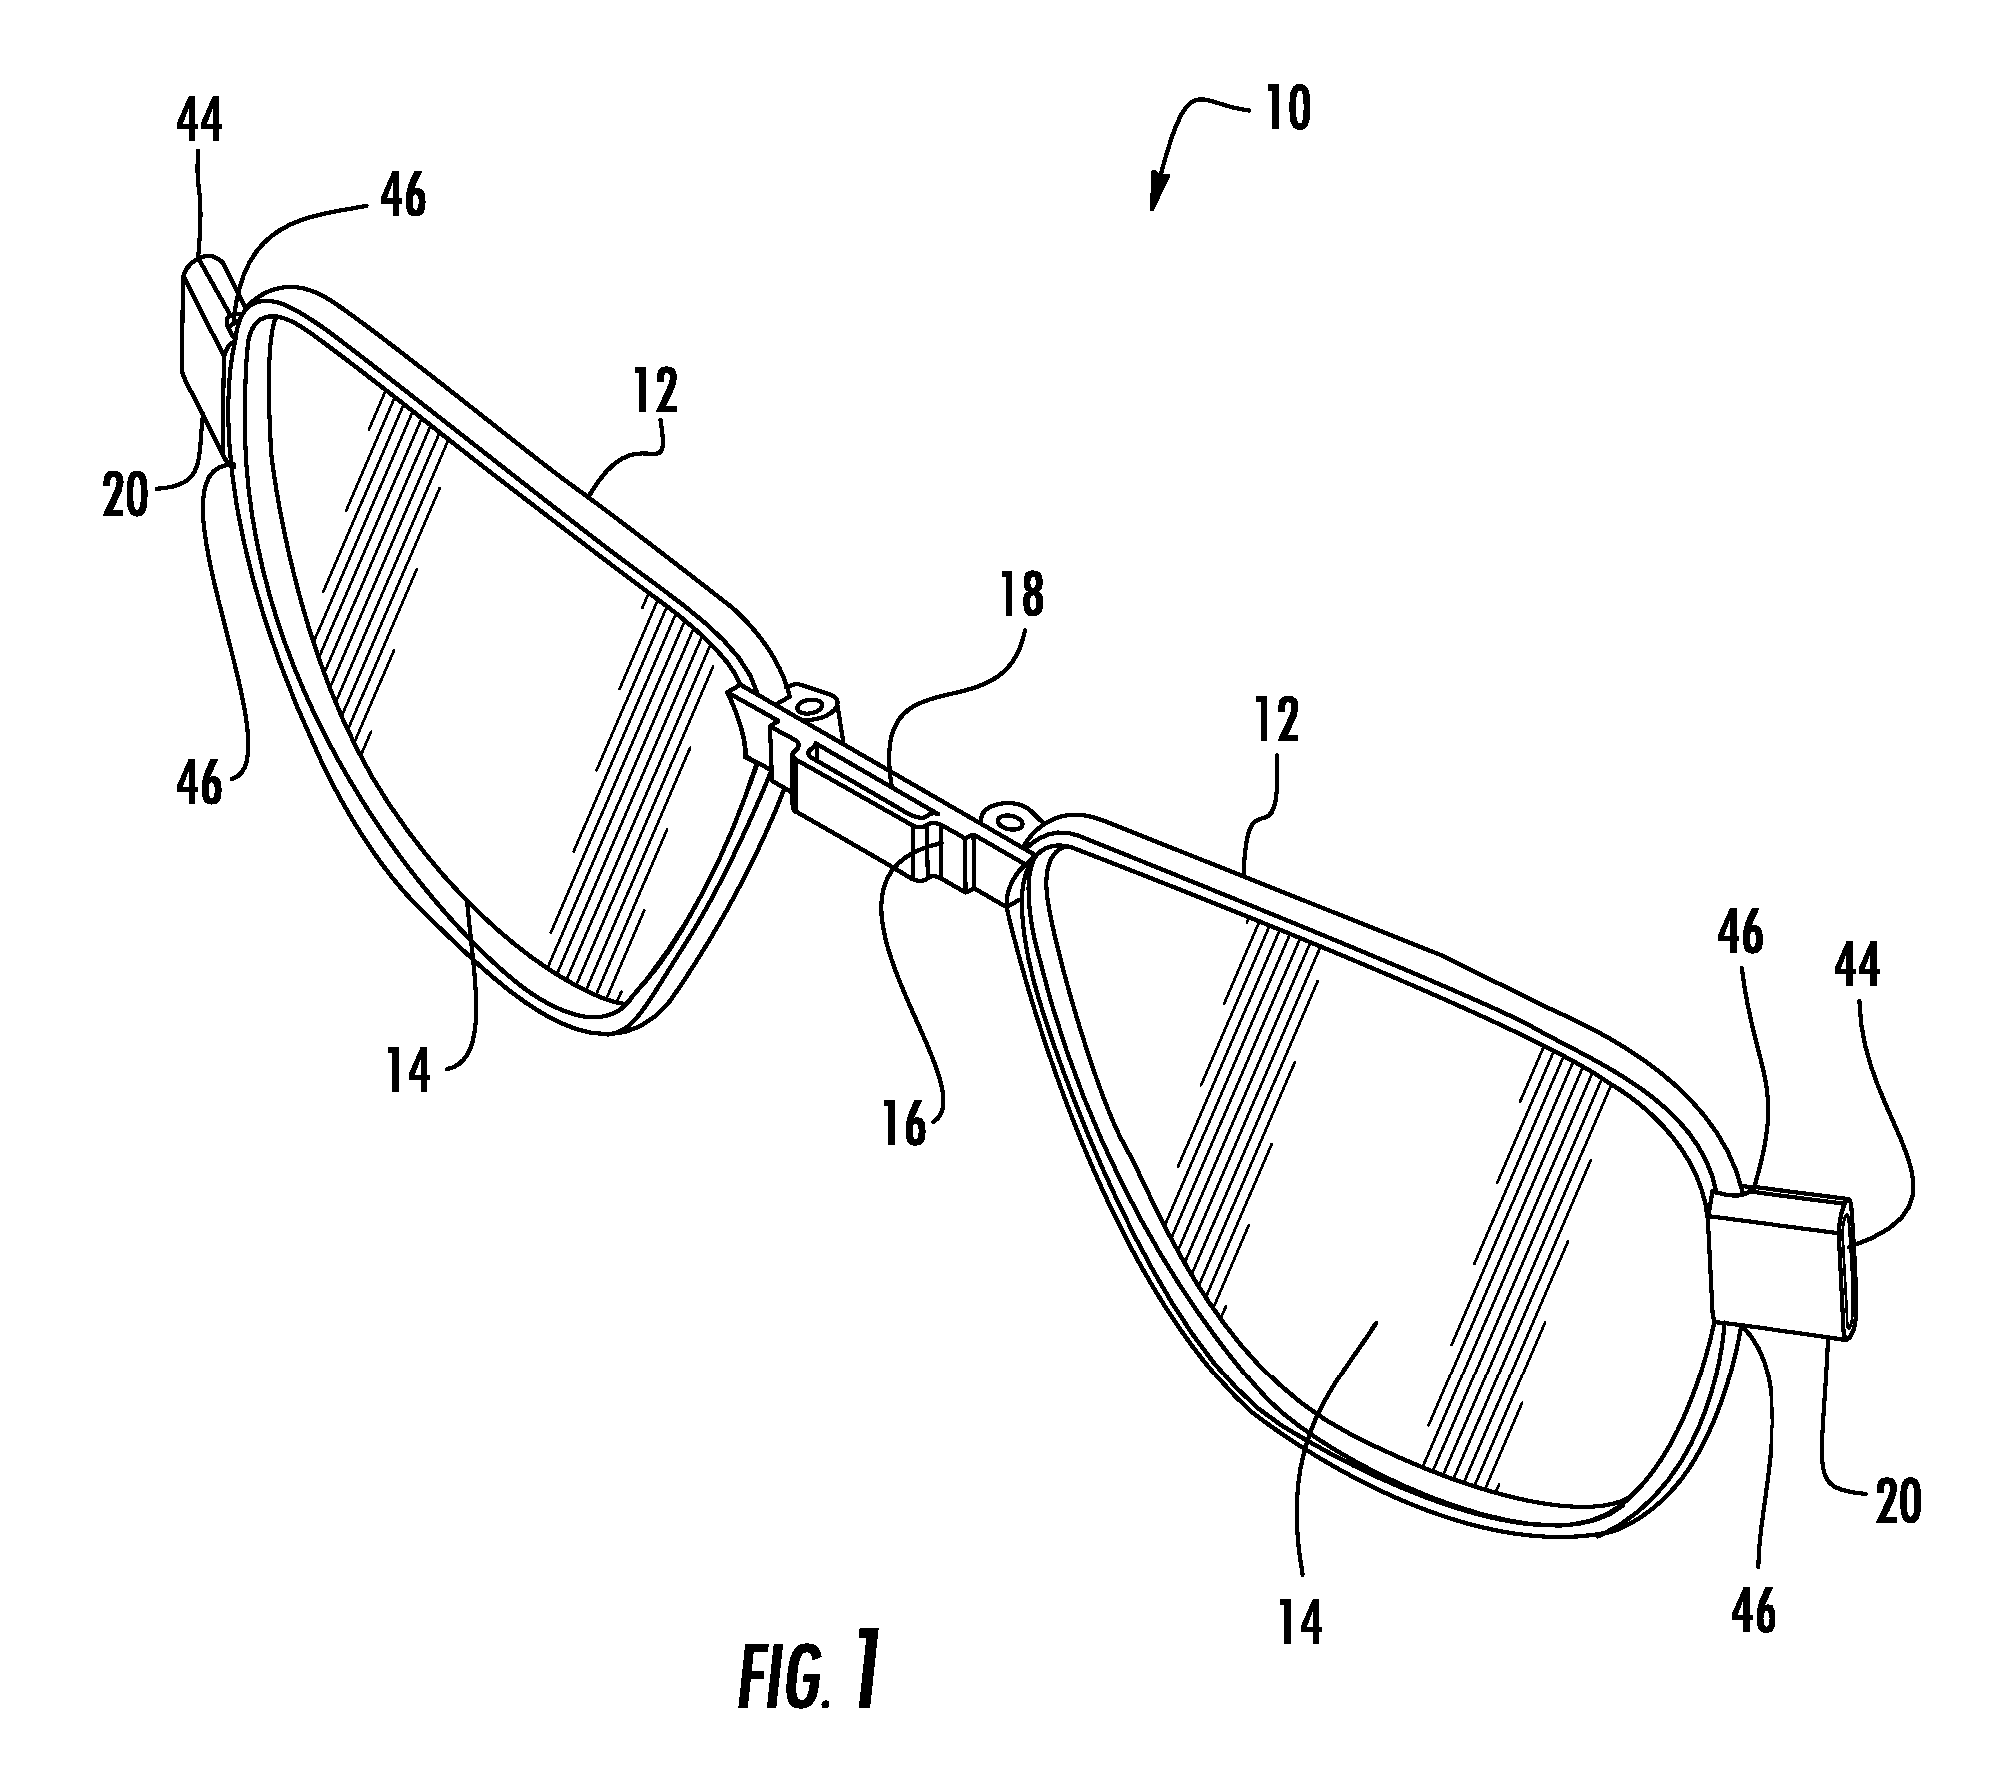 Prescription insert for safety eyewear and conversion kit to make a presciption insert into functional eyeglasses